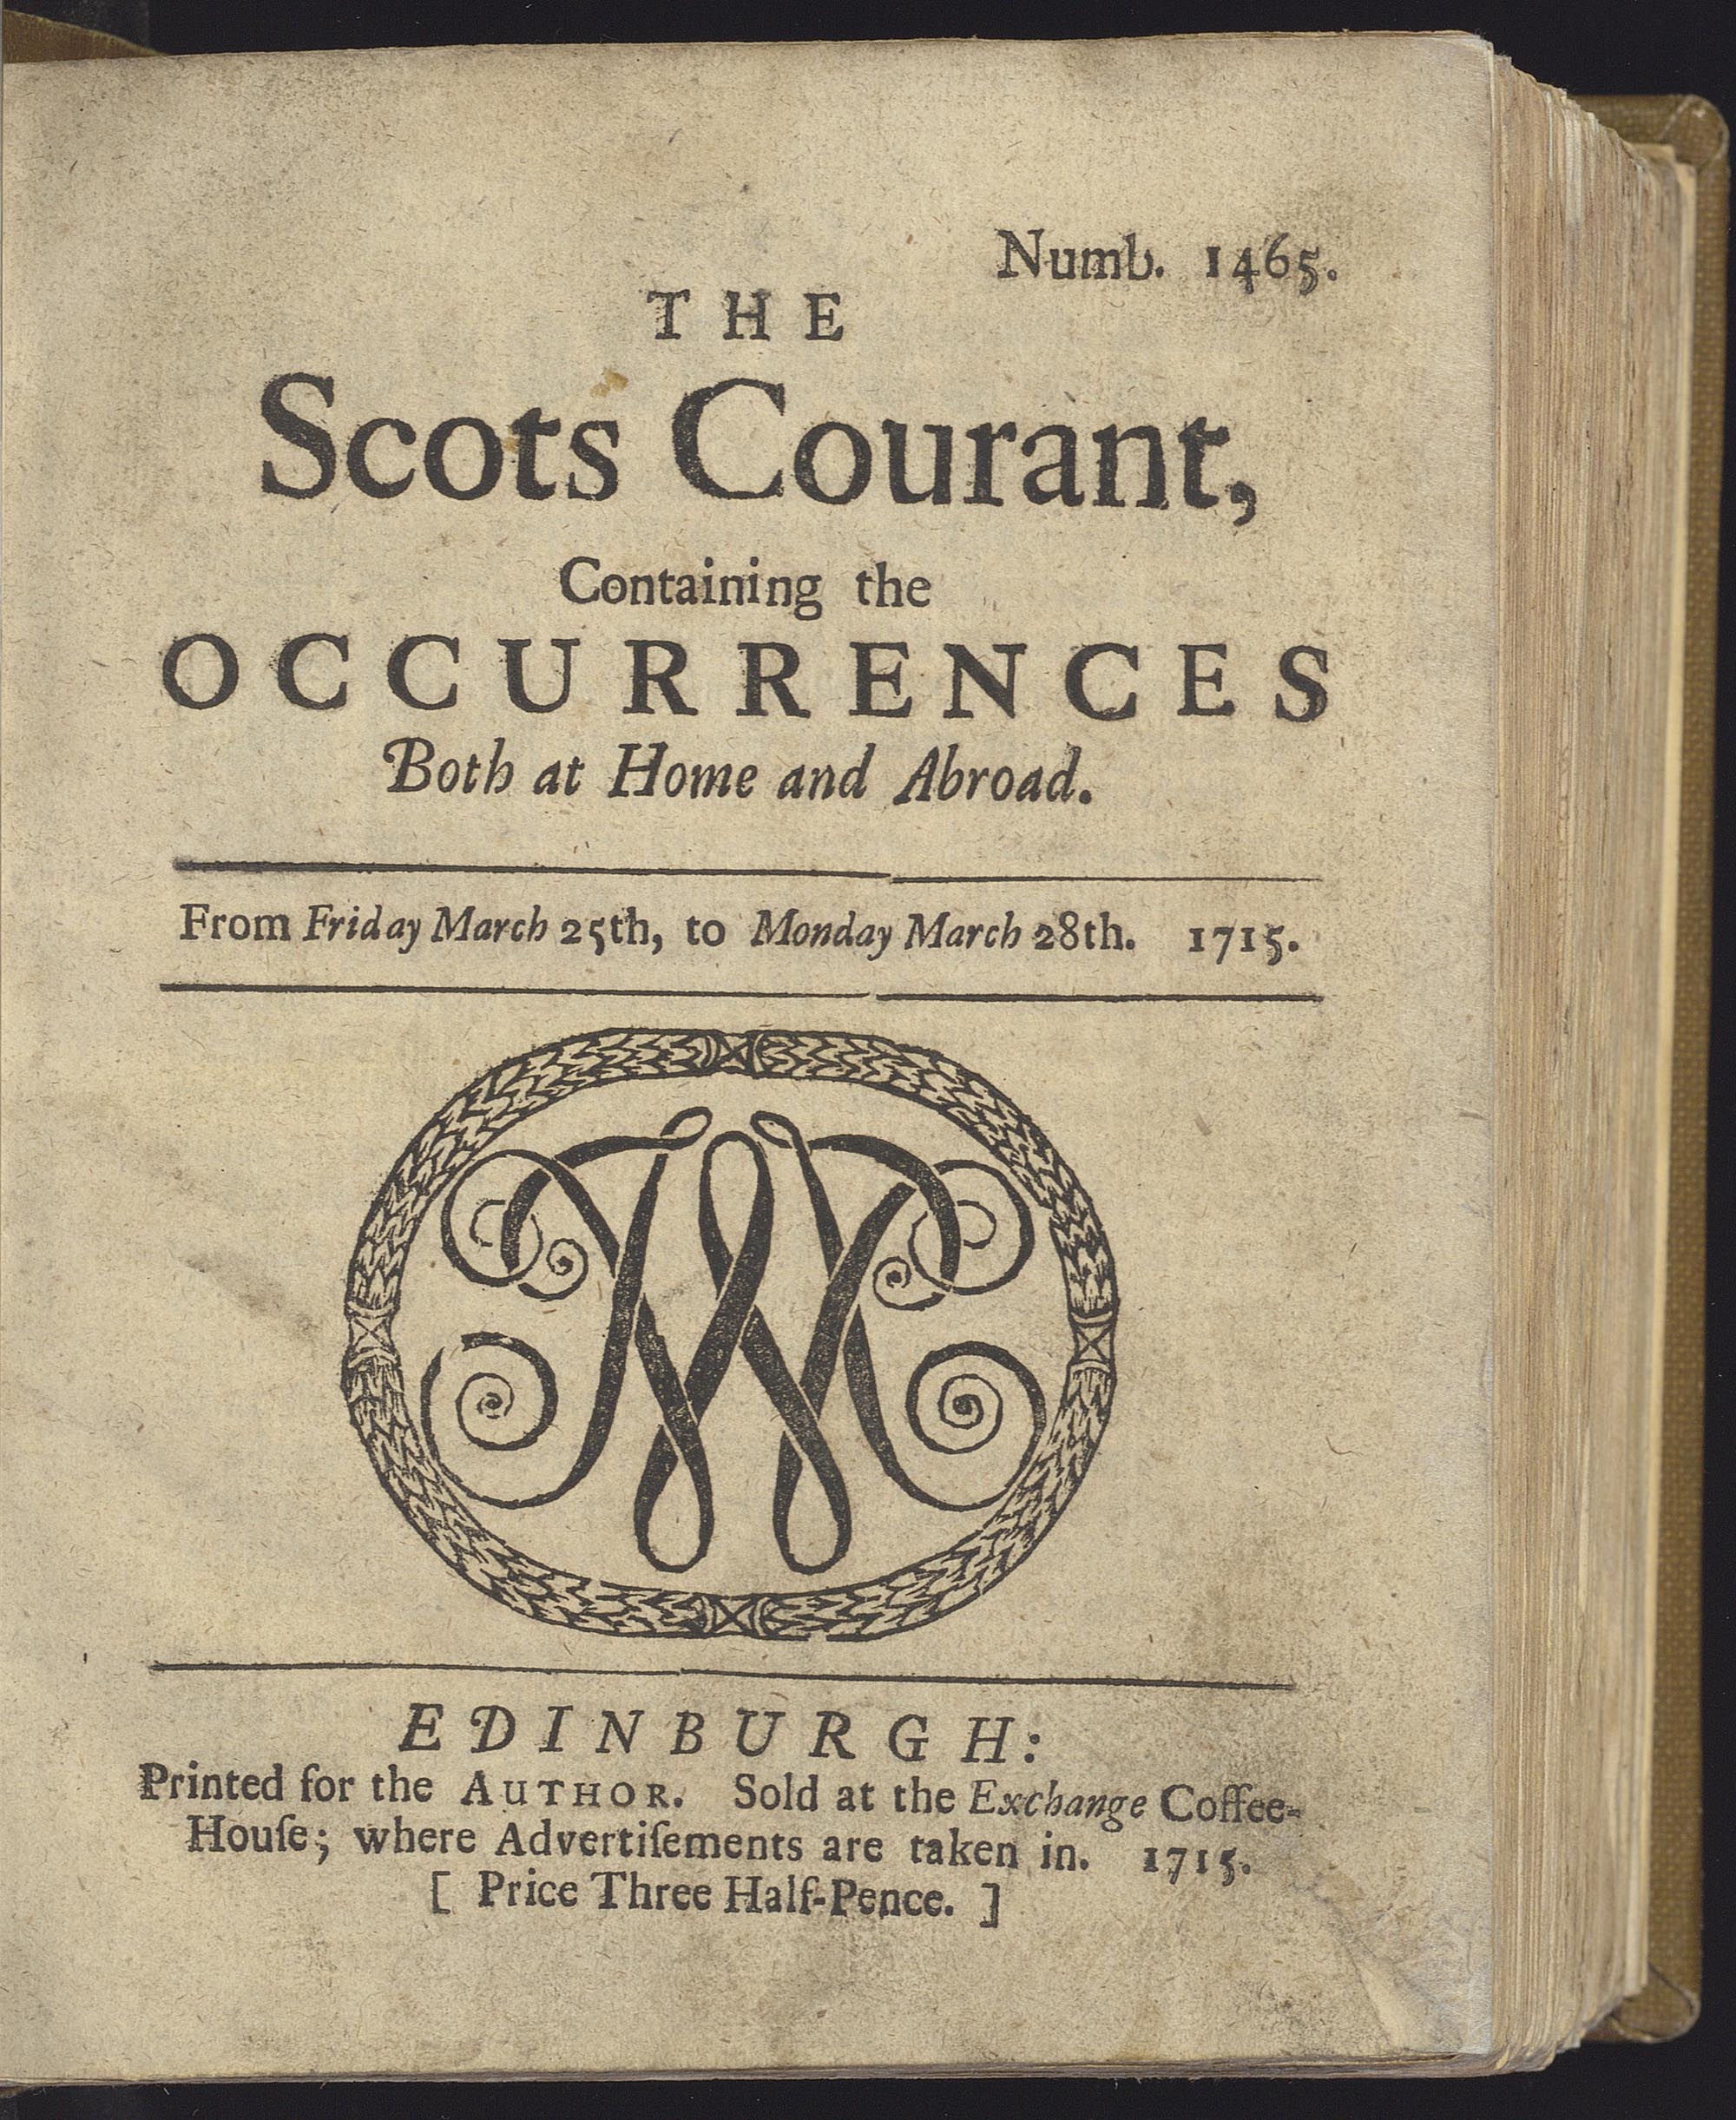 Scots Courant as news-book